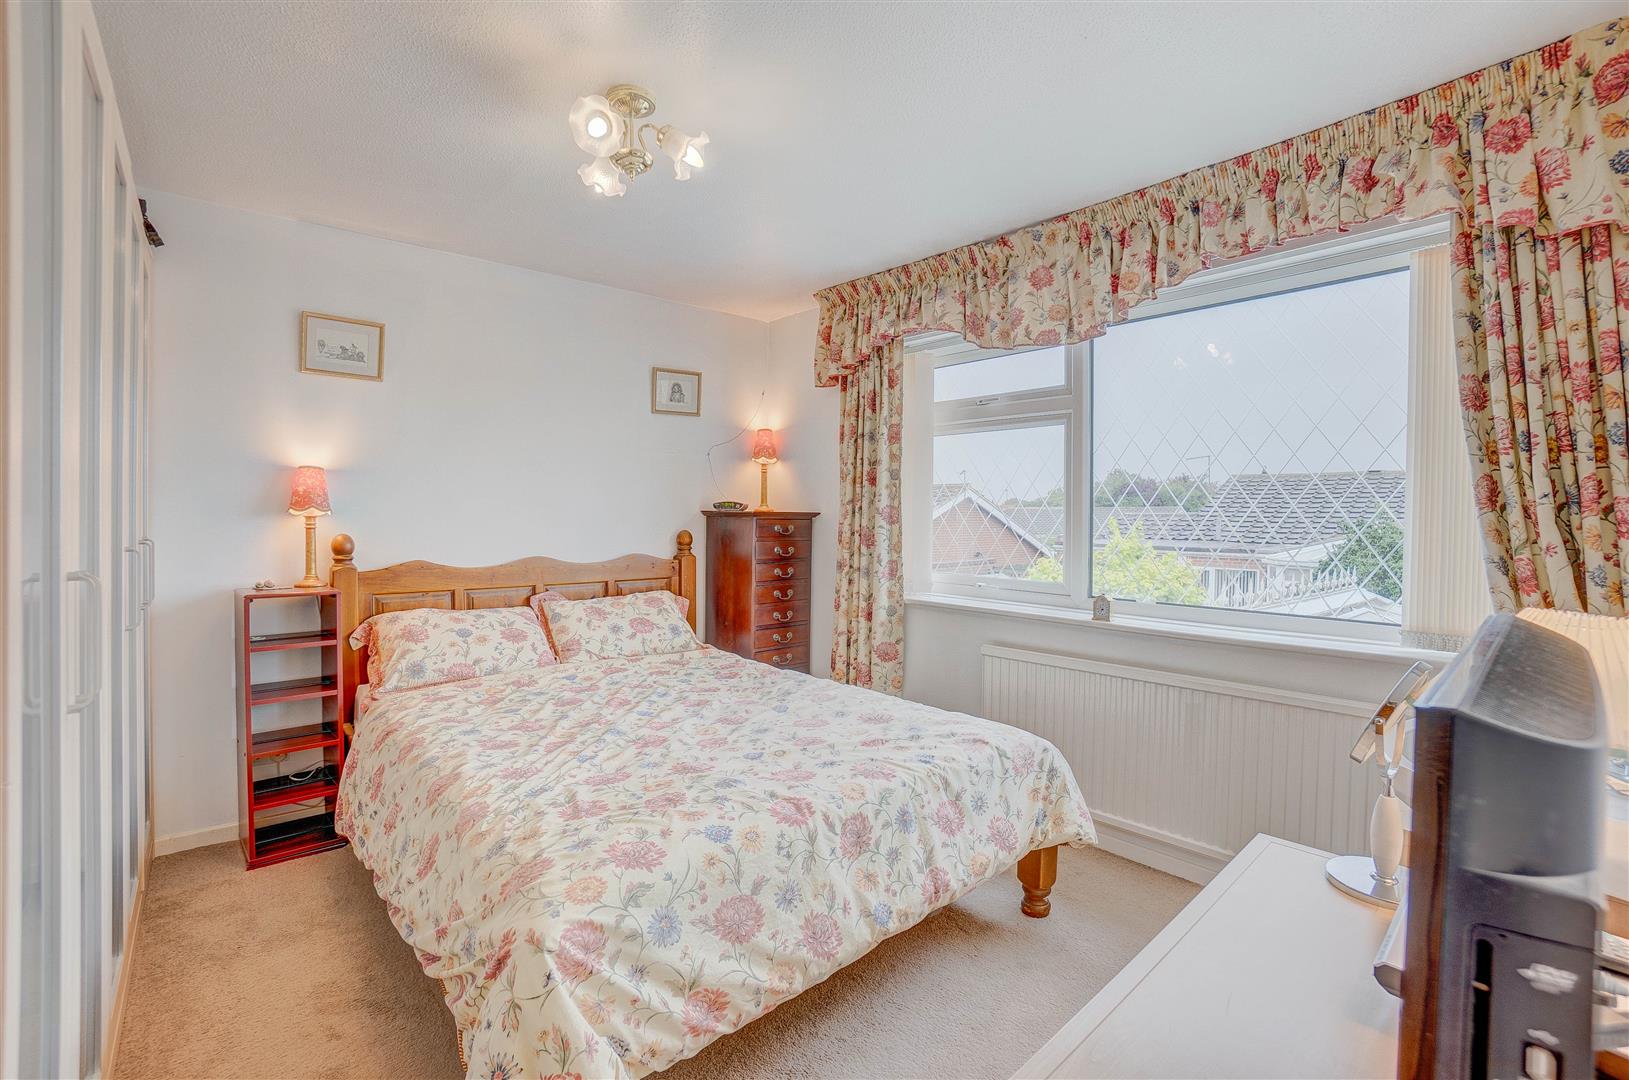 Property image for Brownhill Close, Cropwell Bishop, Nottingham